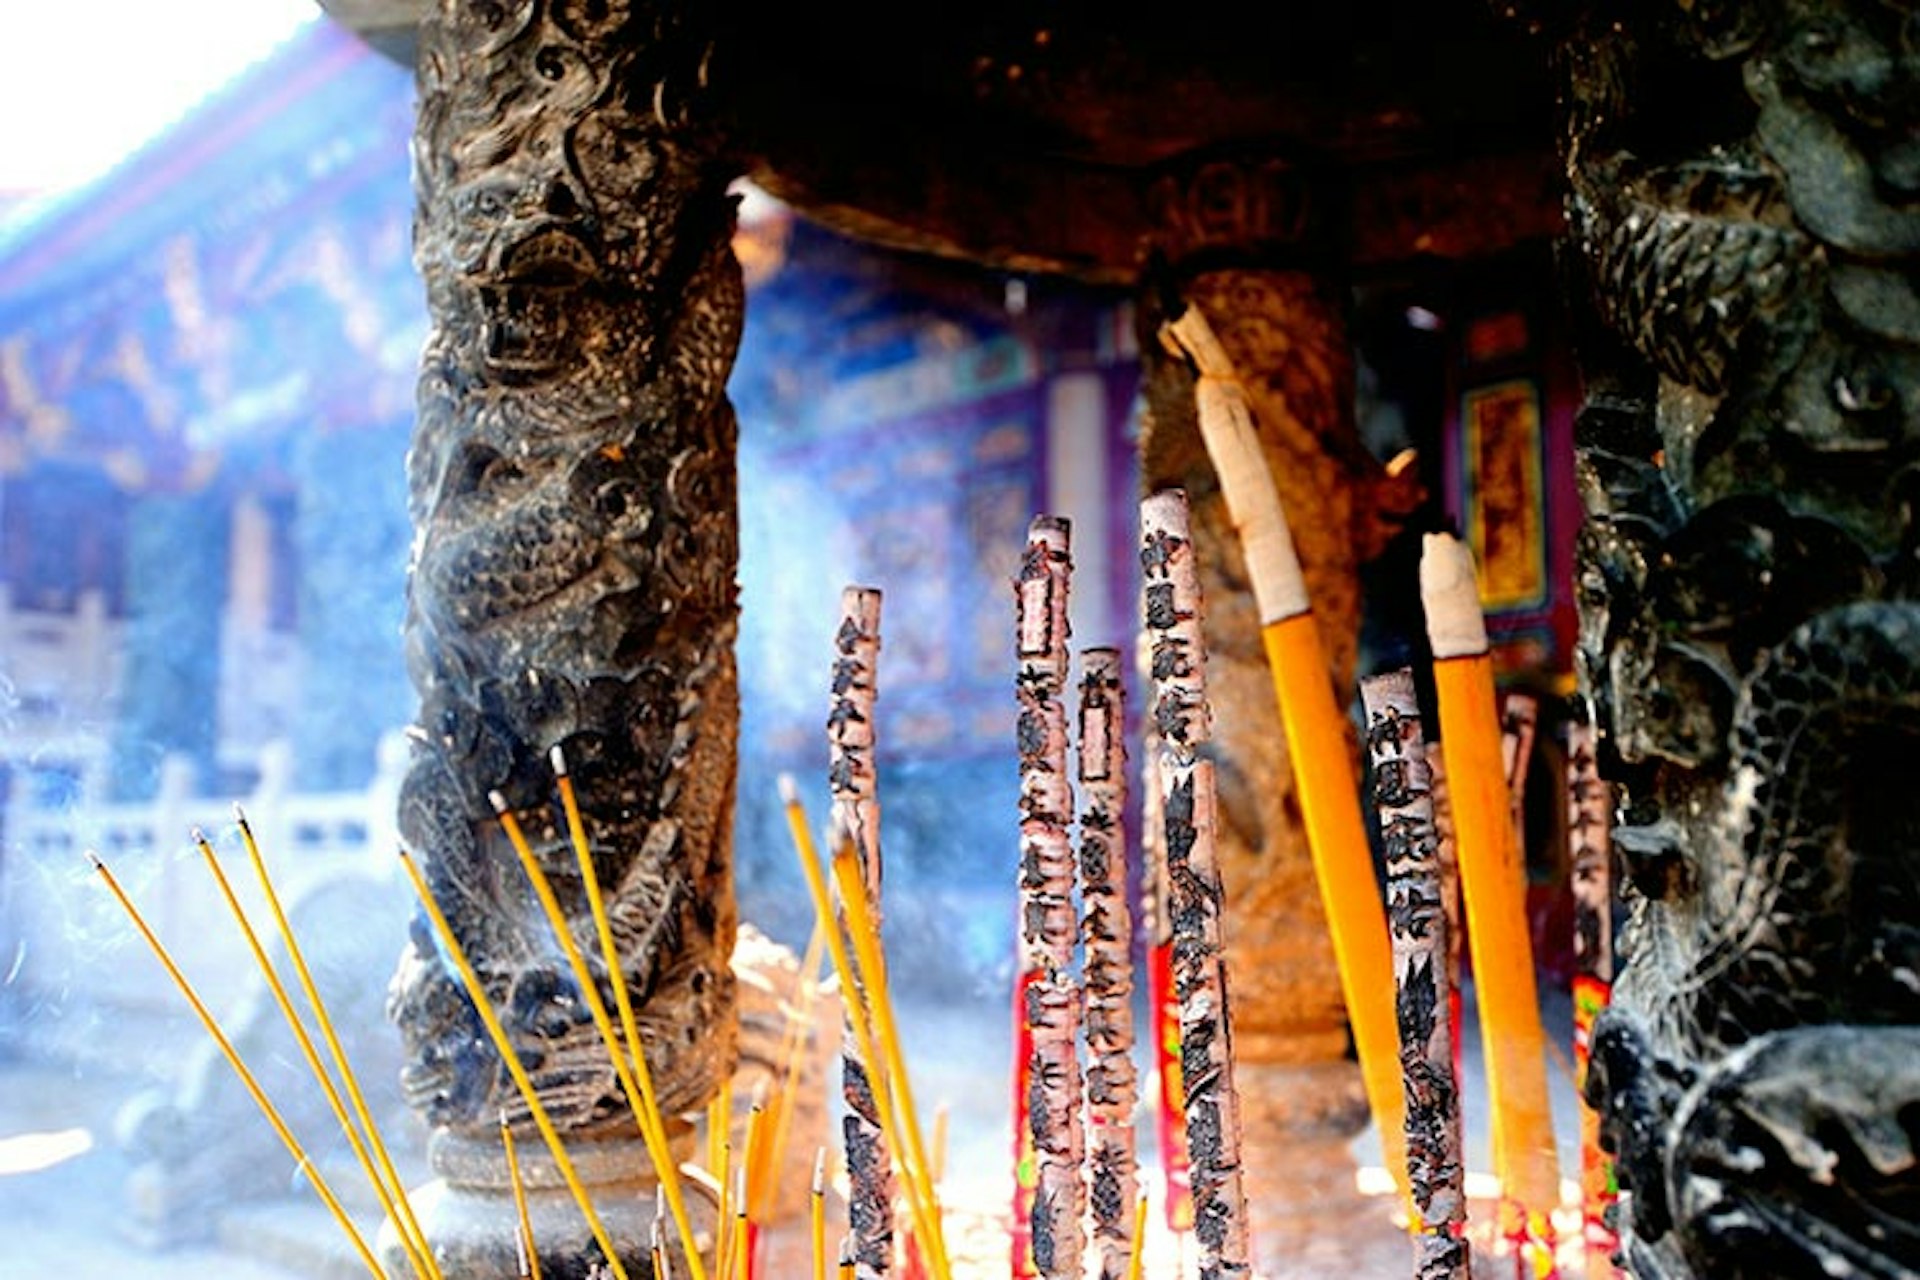 Incense burning at a temple in Macau. Image by curbird / Moment Open / Getty Images.